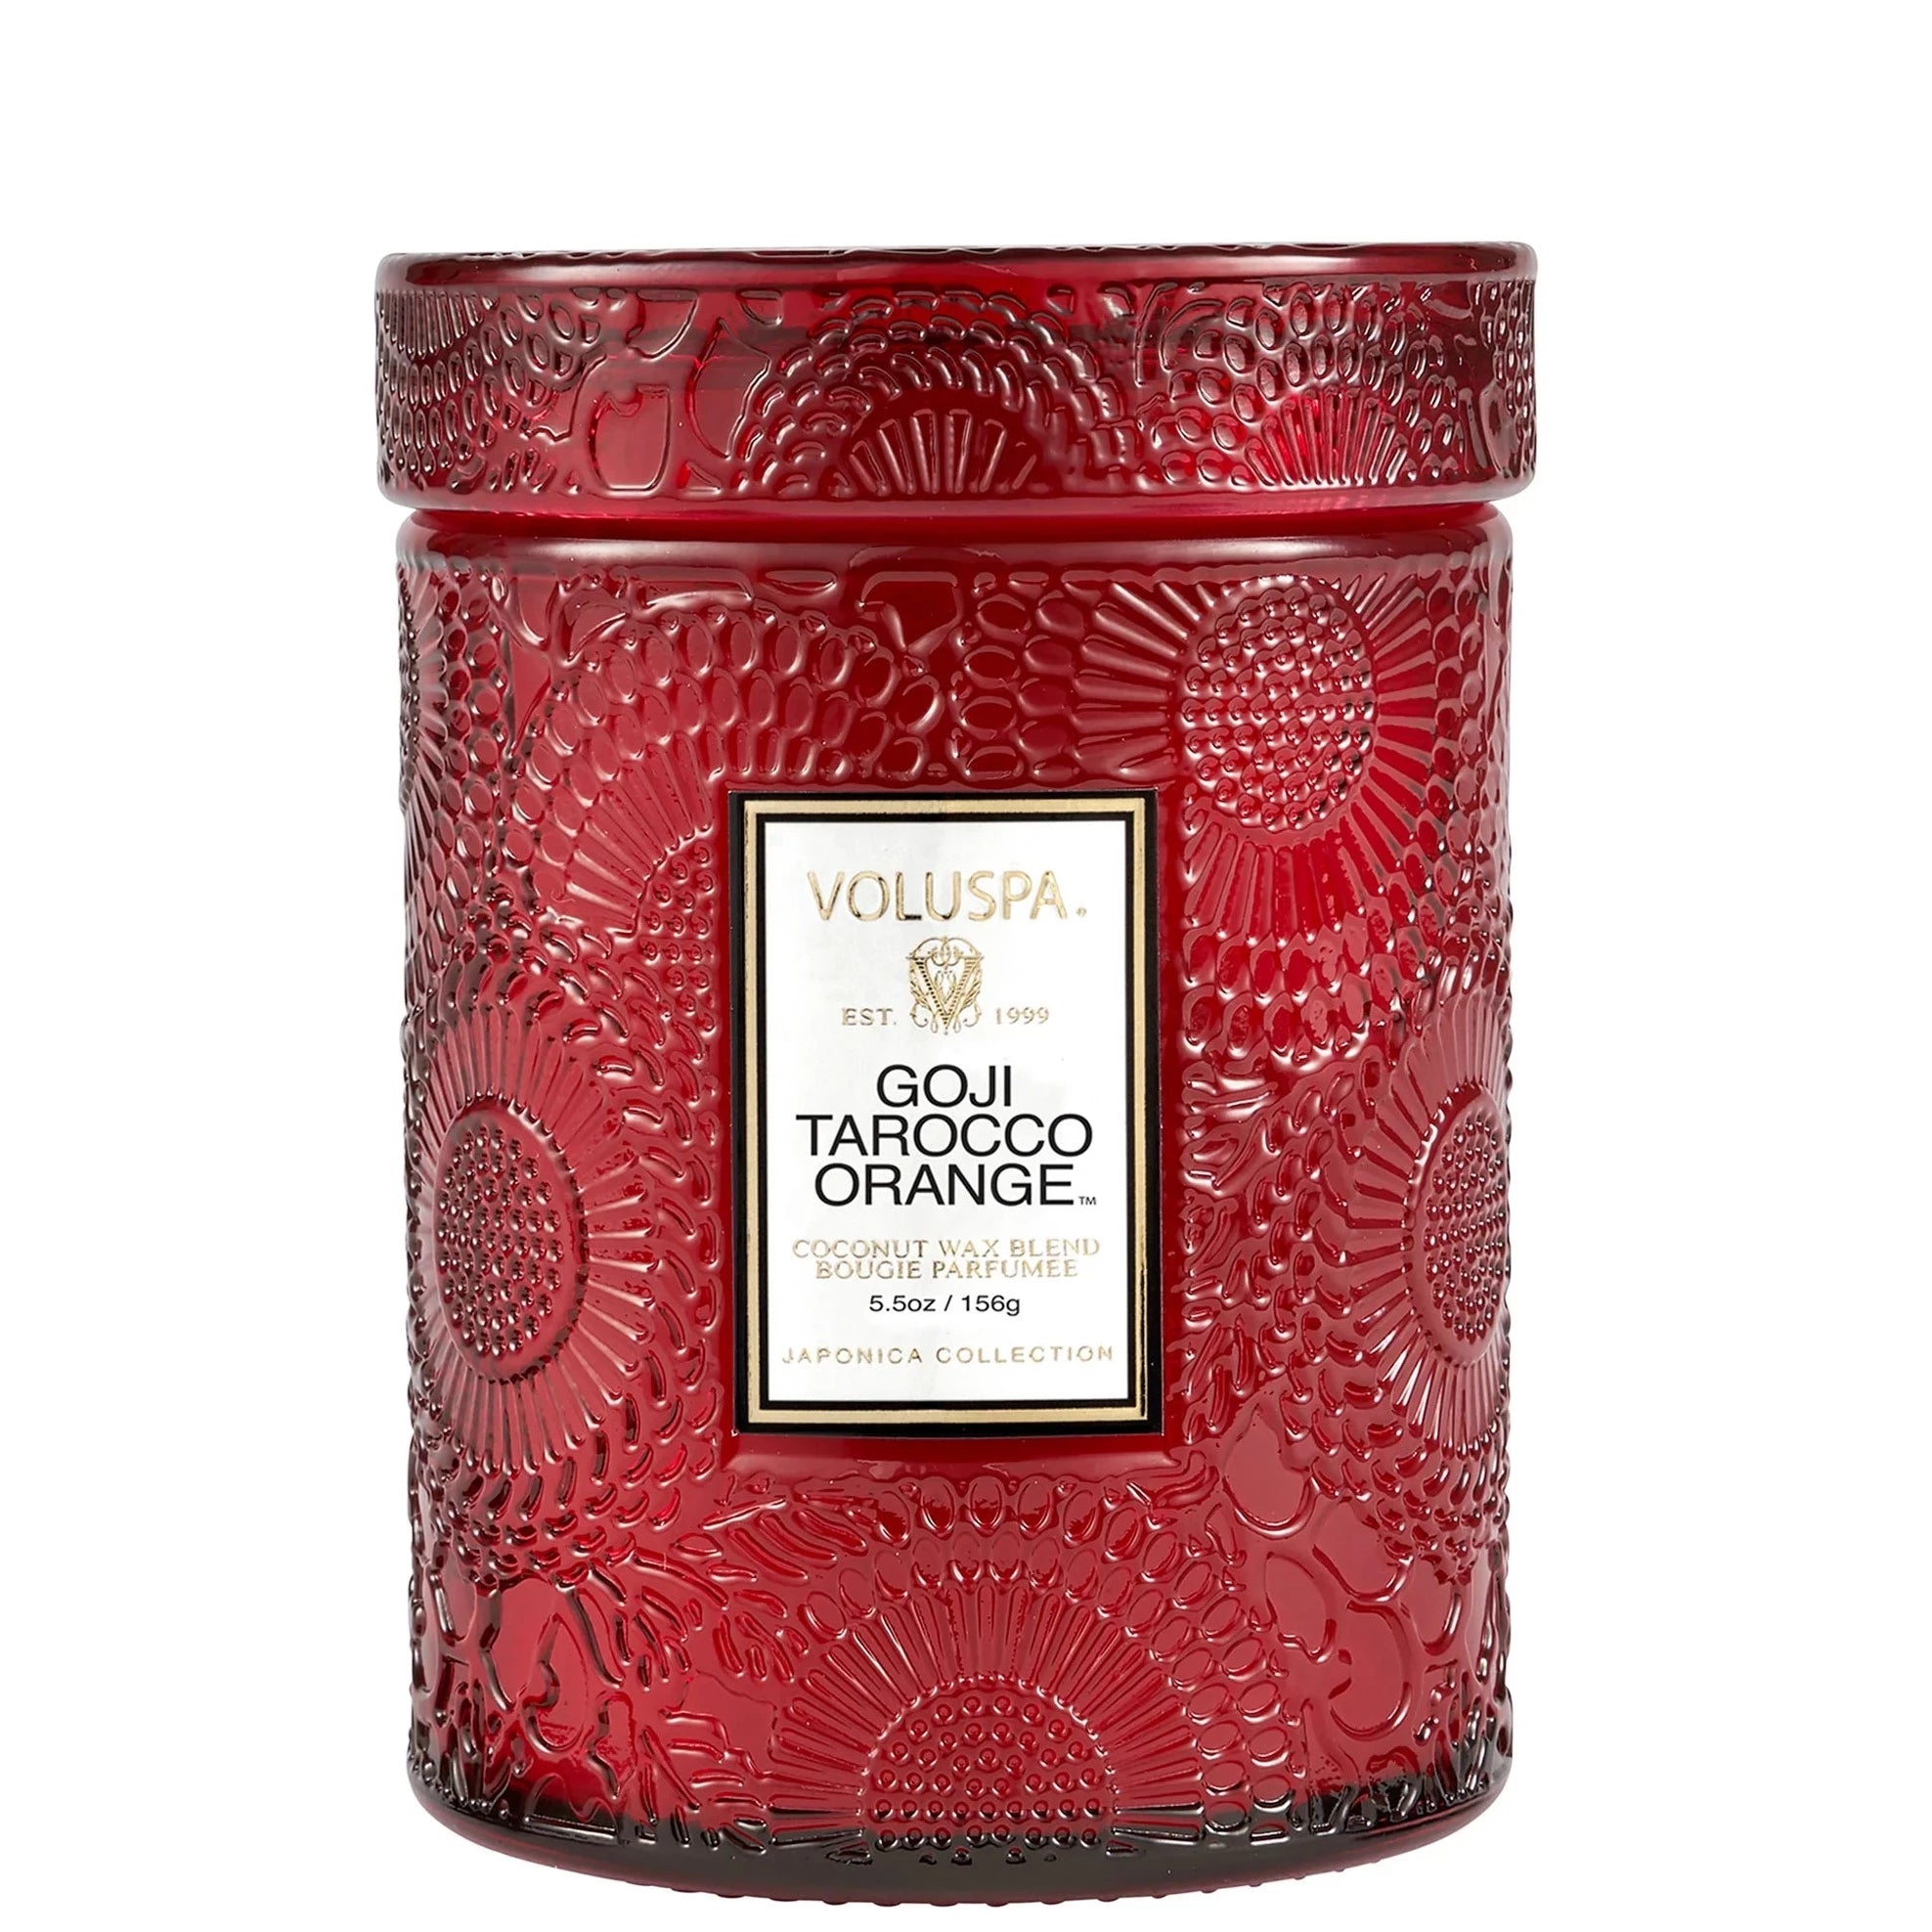 Red embossed glass candle. Embossed is a large floral print. Has white label with a black and gold border. Black text inside with scent name